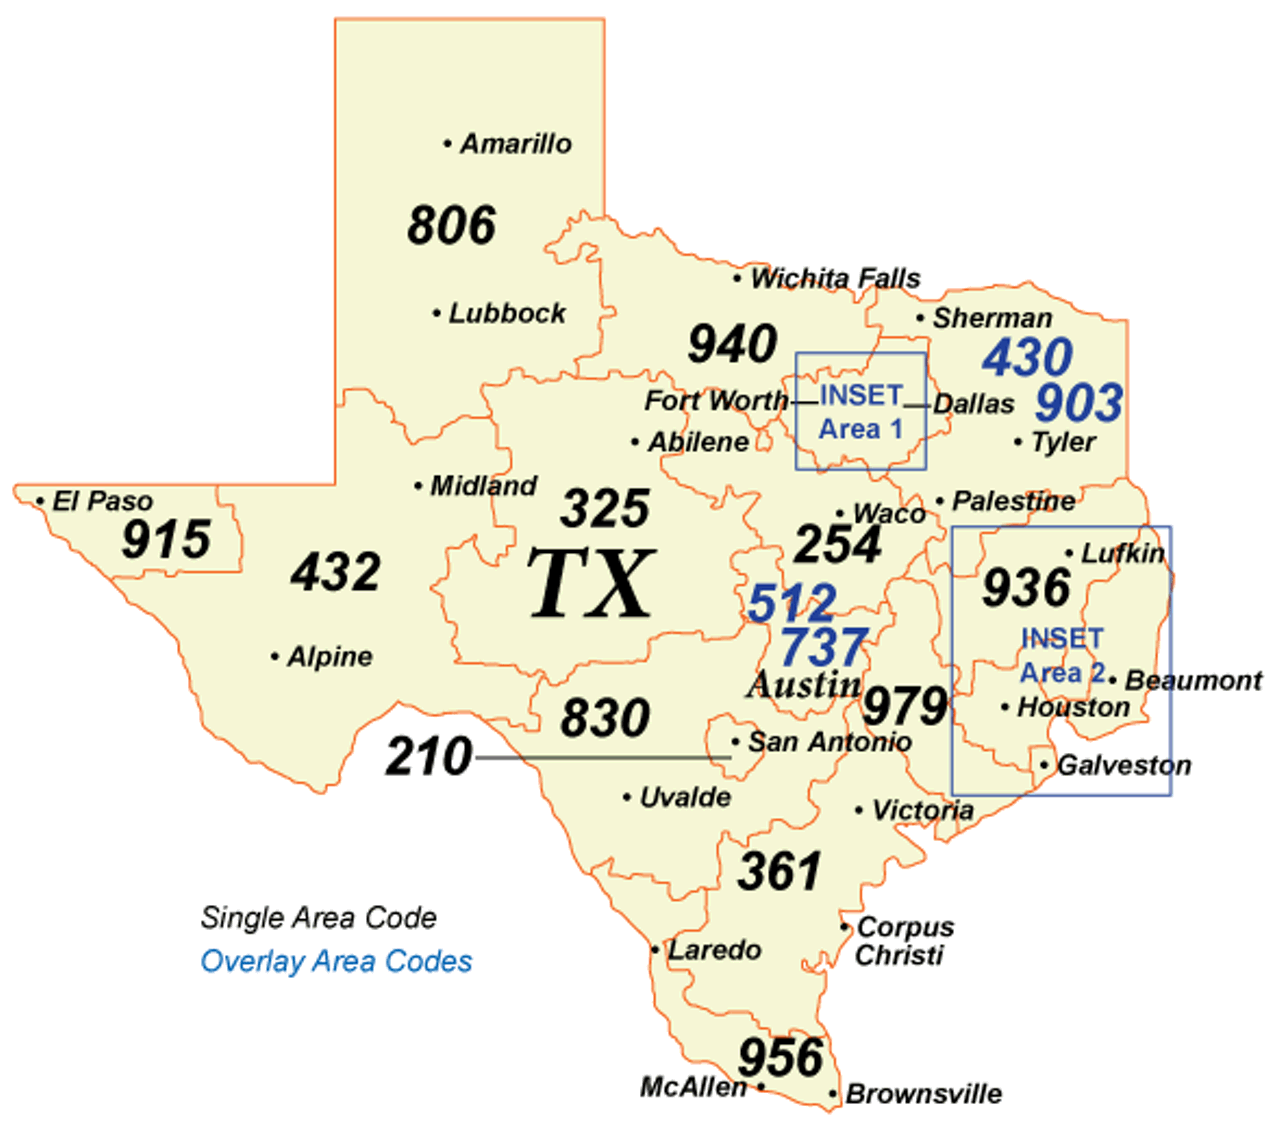 512 area code
2-1-0 may today be synonymous with the Alamo City, but that wasn’t always the case. Beginning in October 1947, San Antonio (as well as Brownsville, Corpus Christi, Harlingen and McAllen) phone numbers used the 5-1-2 area code. With growth rampant in the area, San Antonio adopted the 2-1-0 area code in 1992. Today, Austin and its suburbs use 5-1-2.
Map via North American Numbering Association